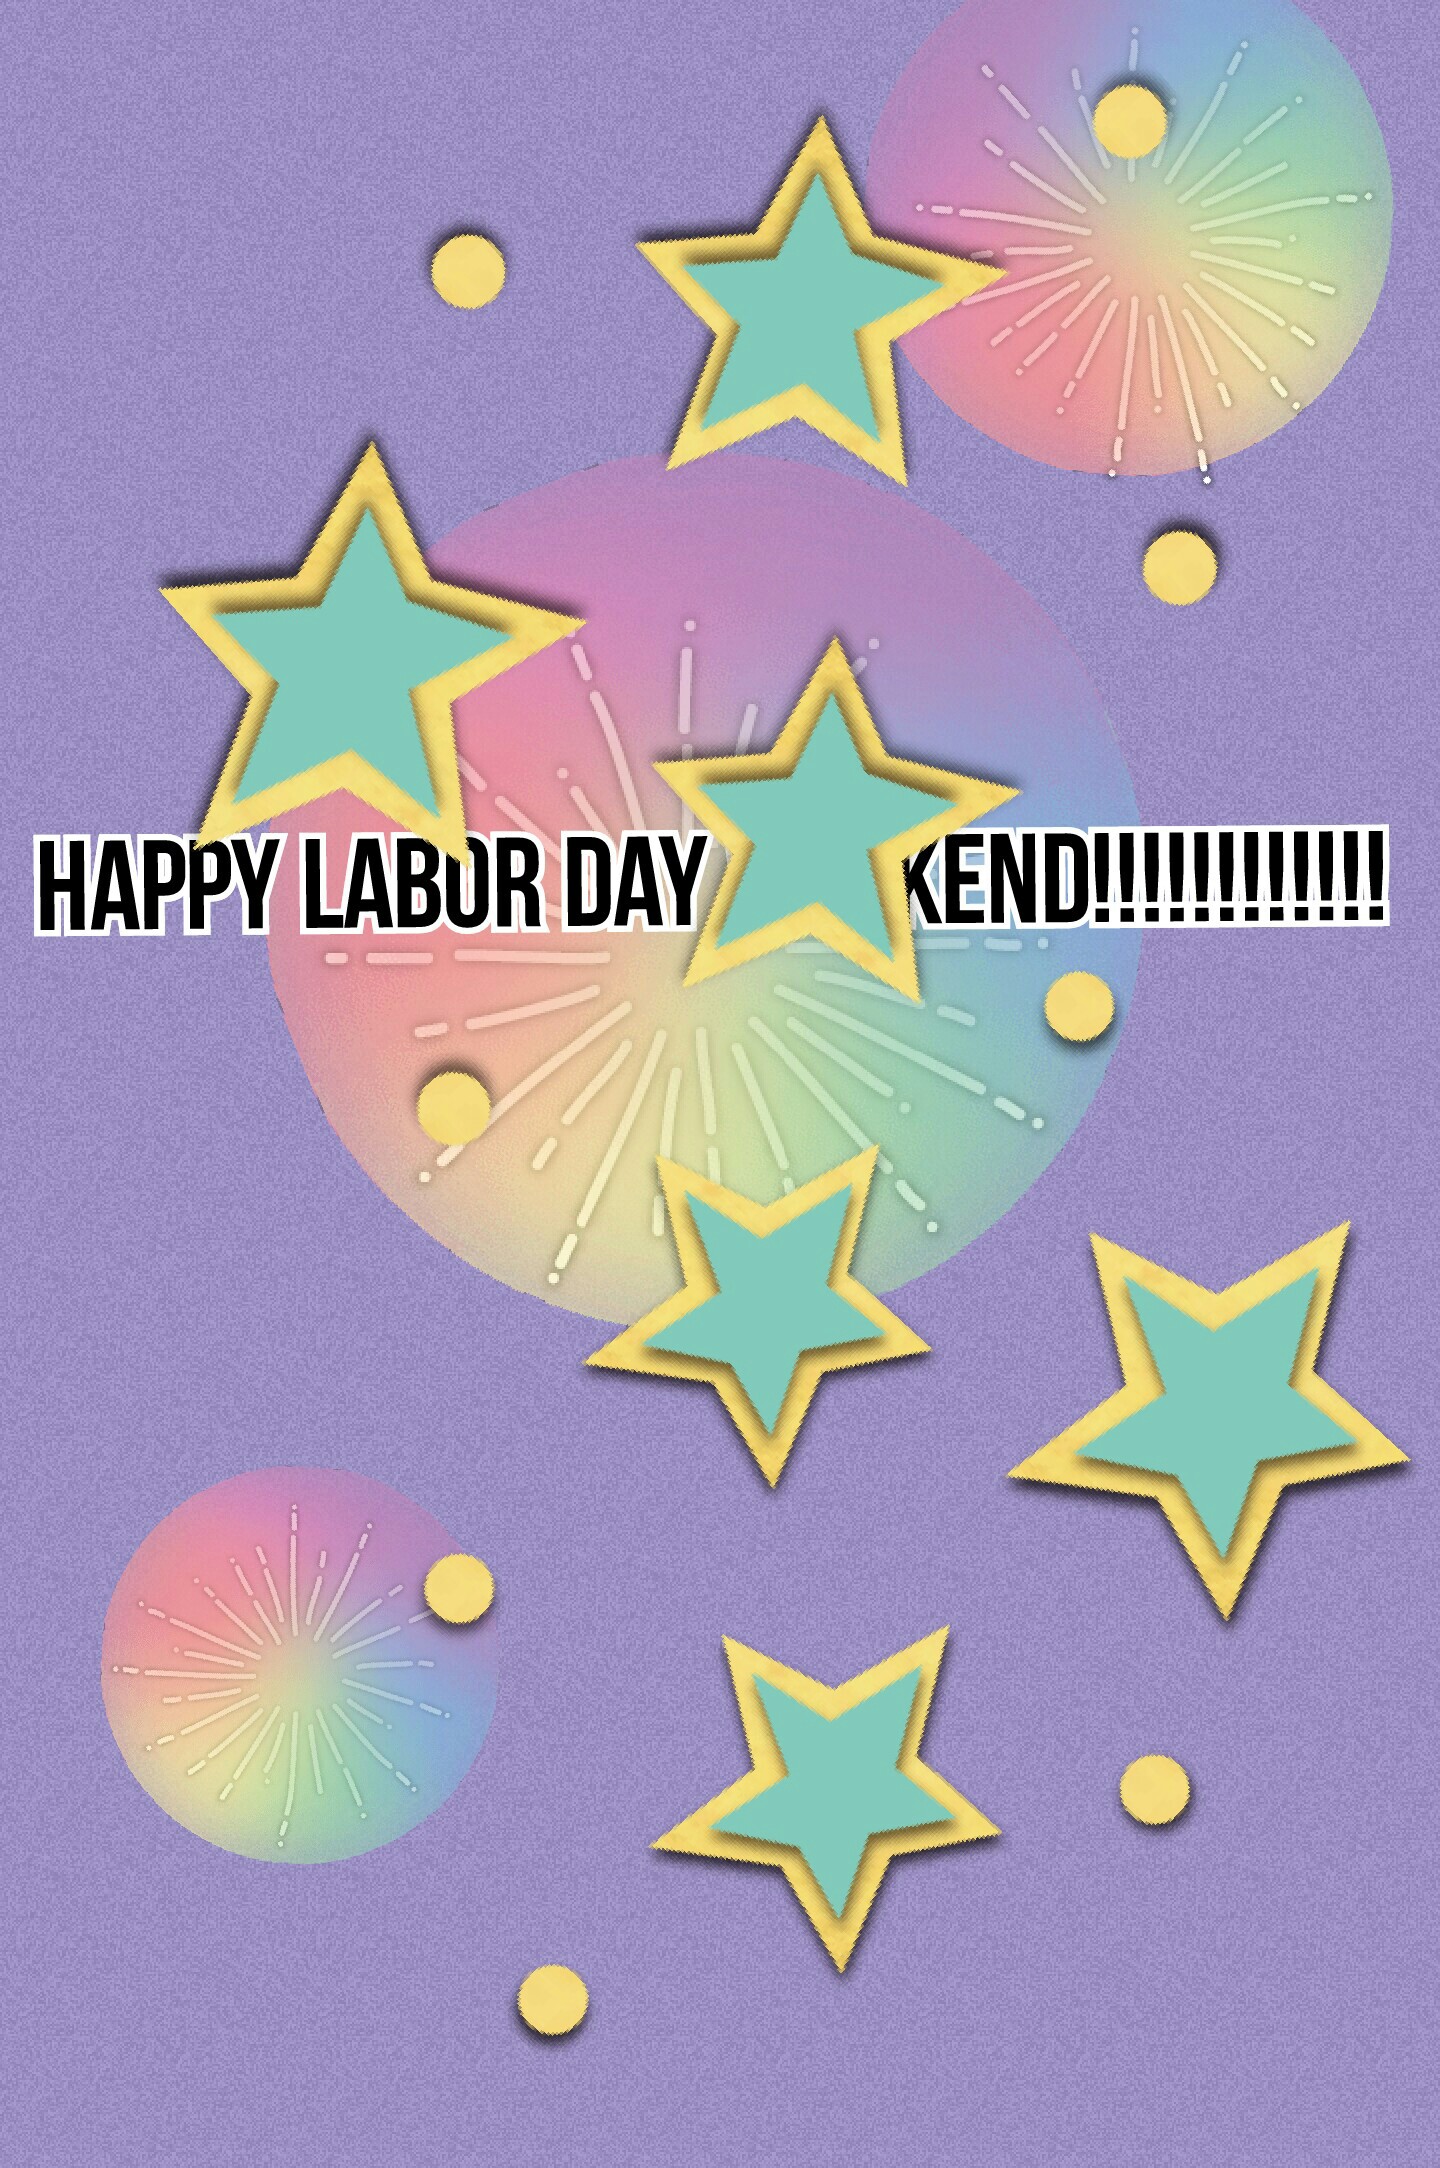 Happy labor day weekend!!!!!!!!!!!!✨😃😃🐼